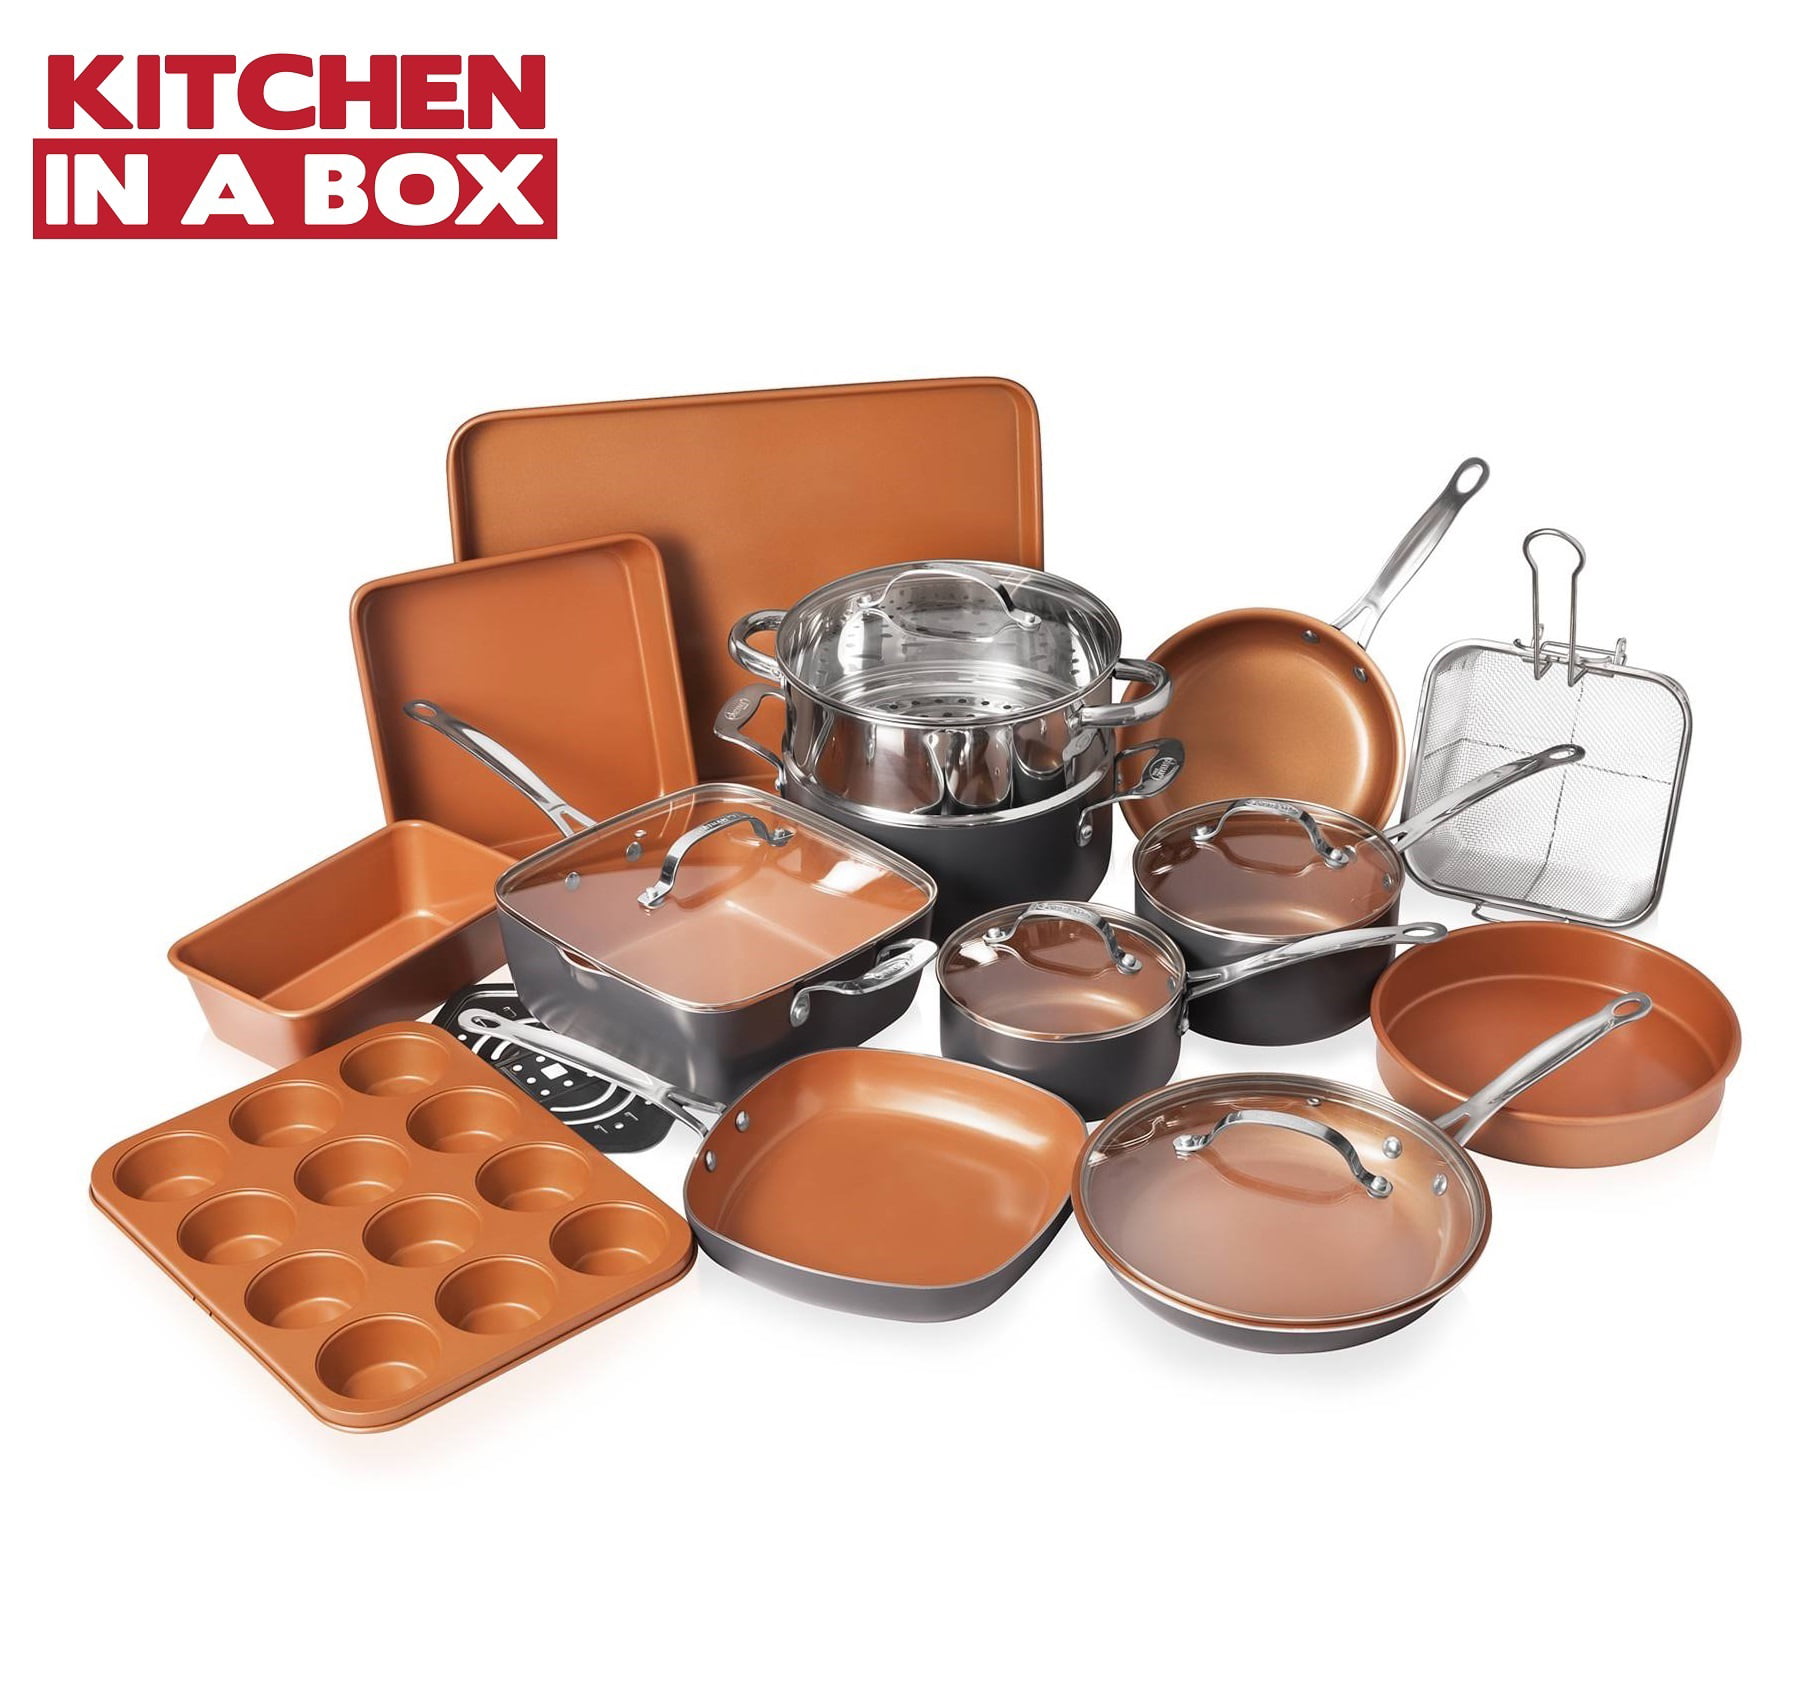 Gotham Steel 20 Piece All in One Kitchen Cookware + Bakeware Set with Nonstick Durable Ceramic Copper Coating  Includes Skillets, Stock Pots, Deep Square Fry Basket, Cookie Sheet and Baking Pans